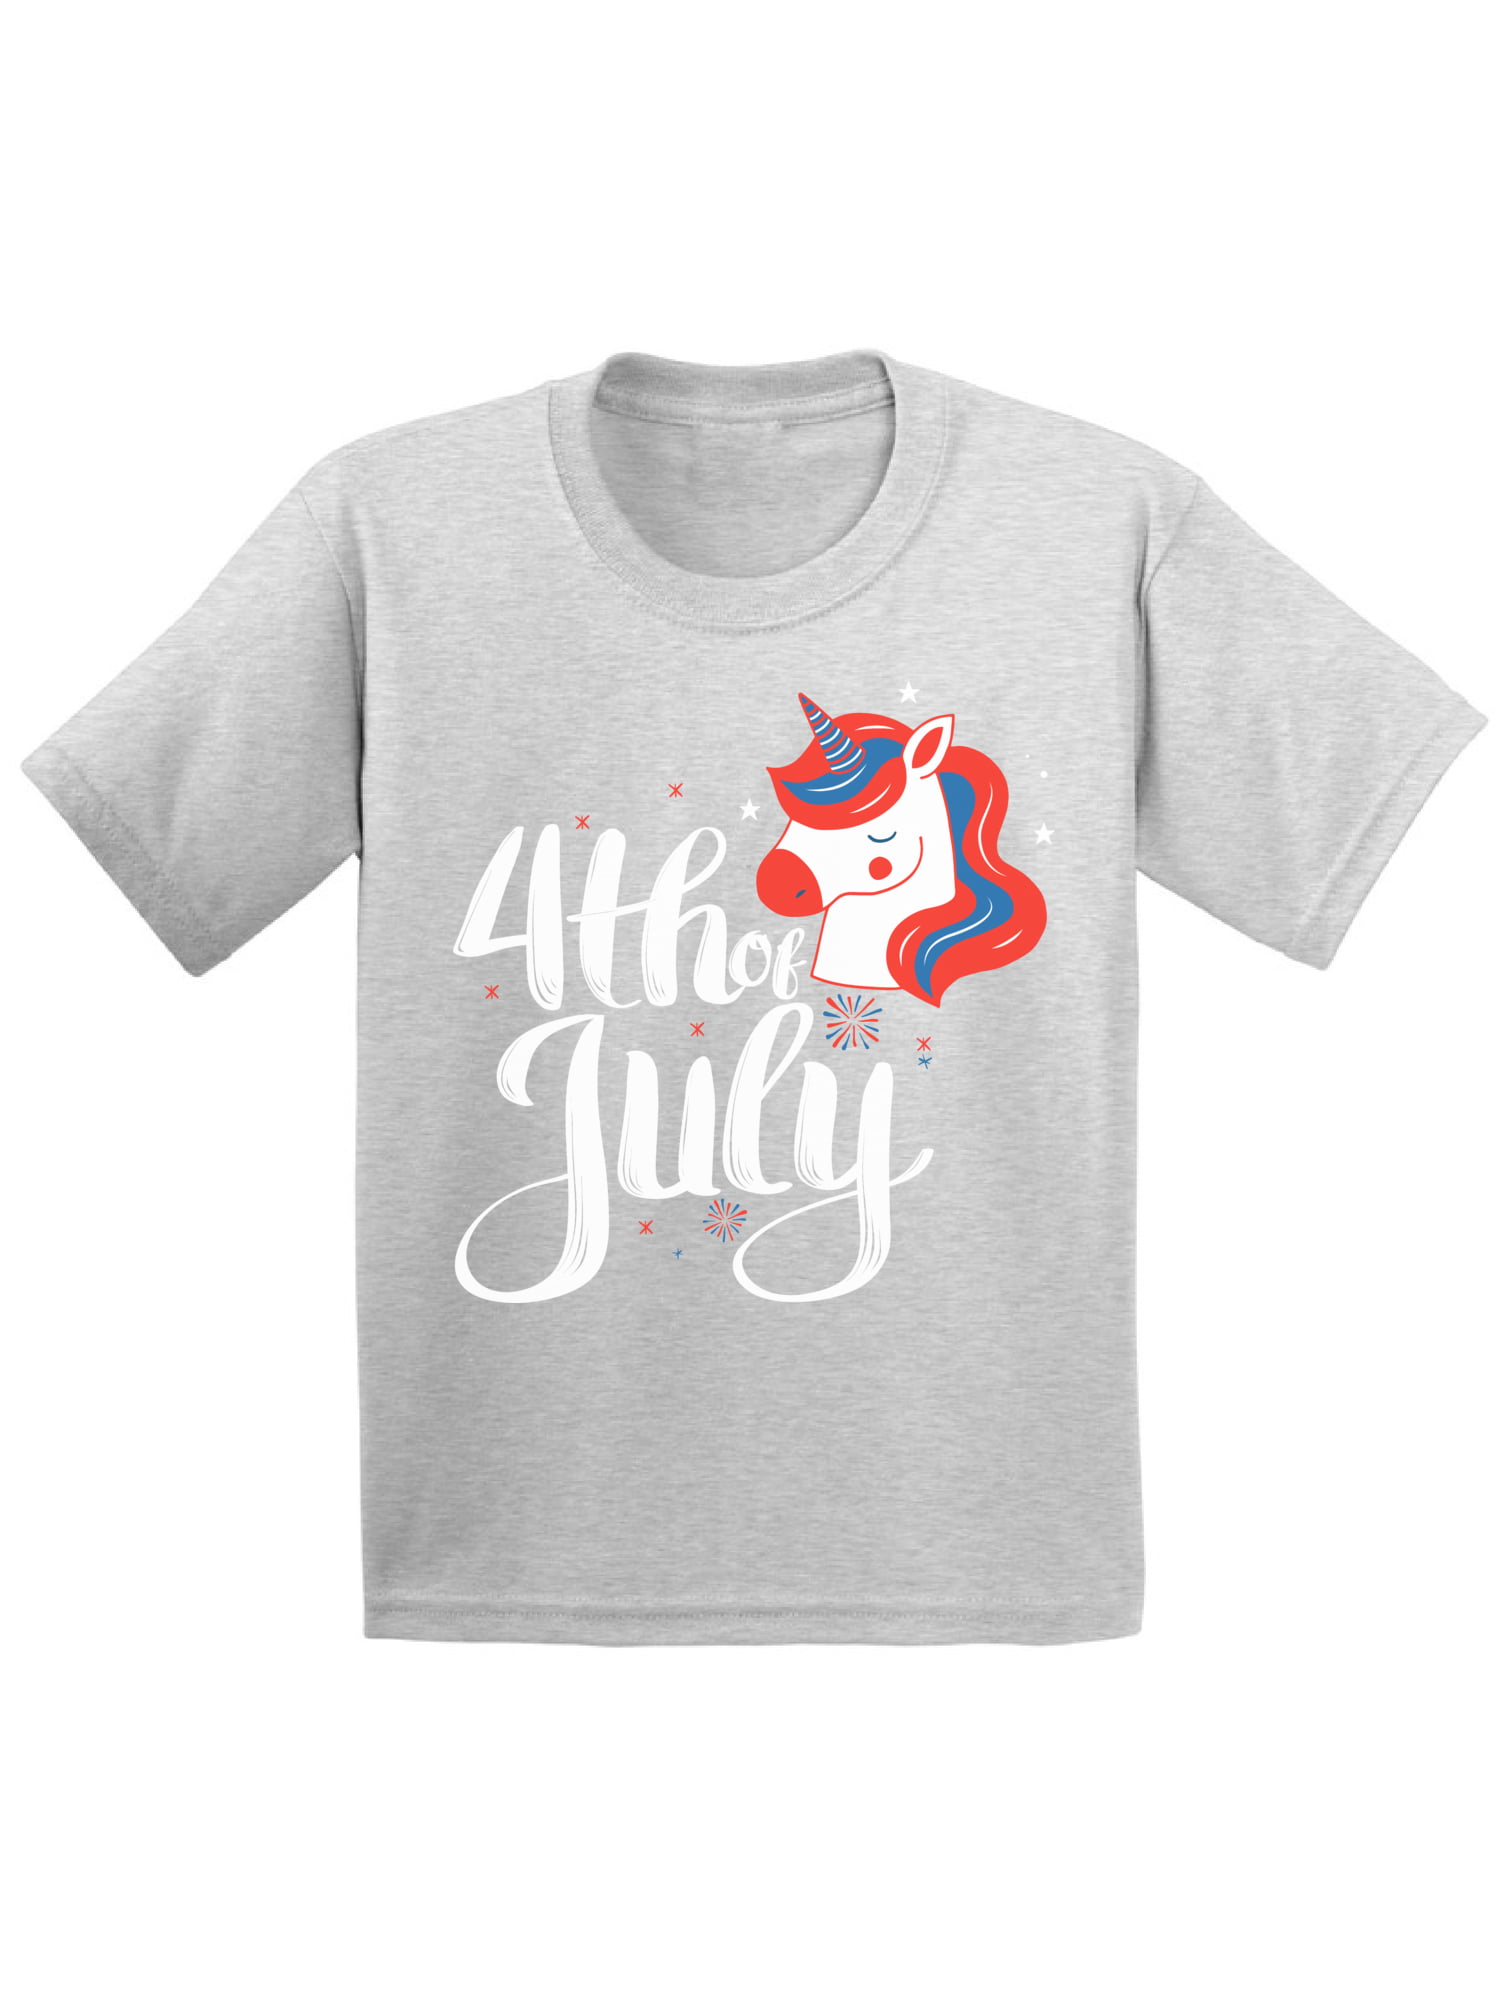 Fourth of July Clothing Memorial Day T Shirt Gifts for Children. Unicorn T-Shirt Made in USA Patriotic Gifts Funny Infant Shirt